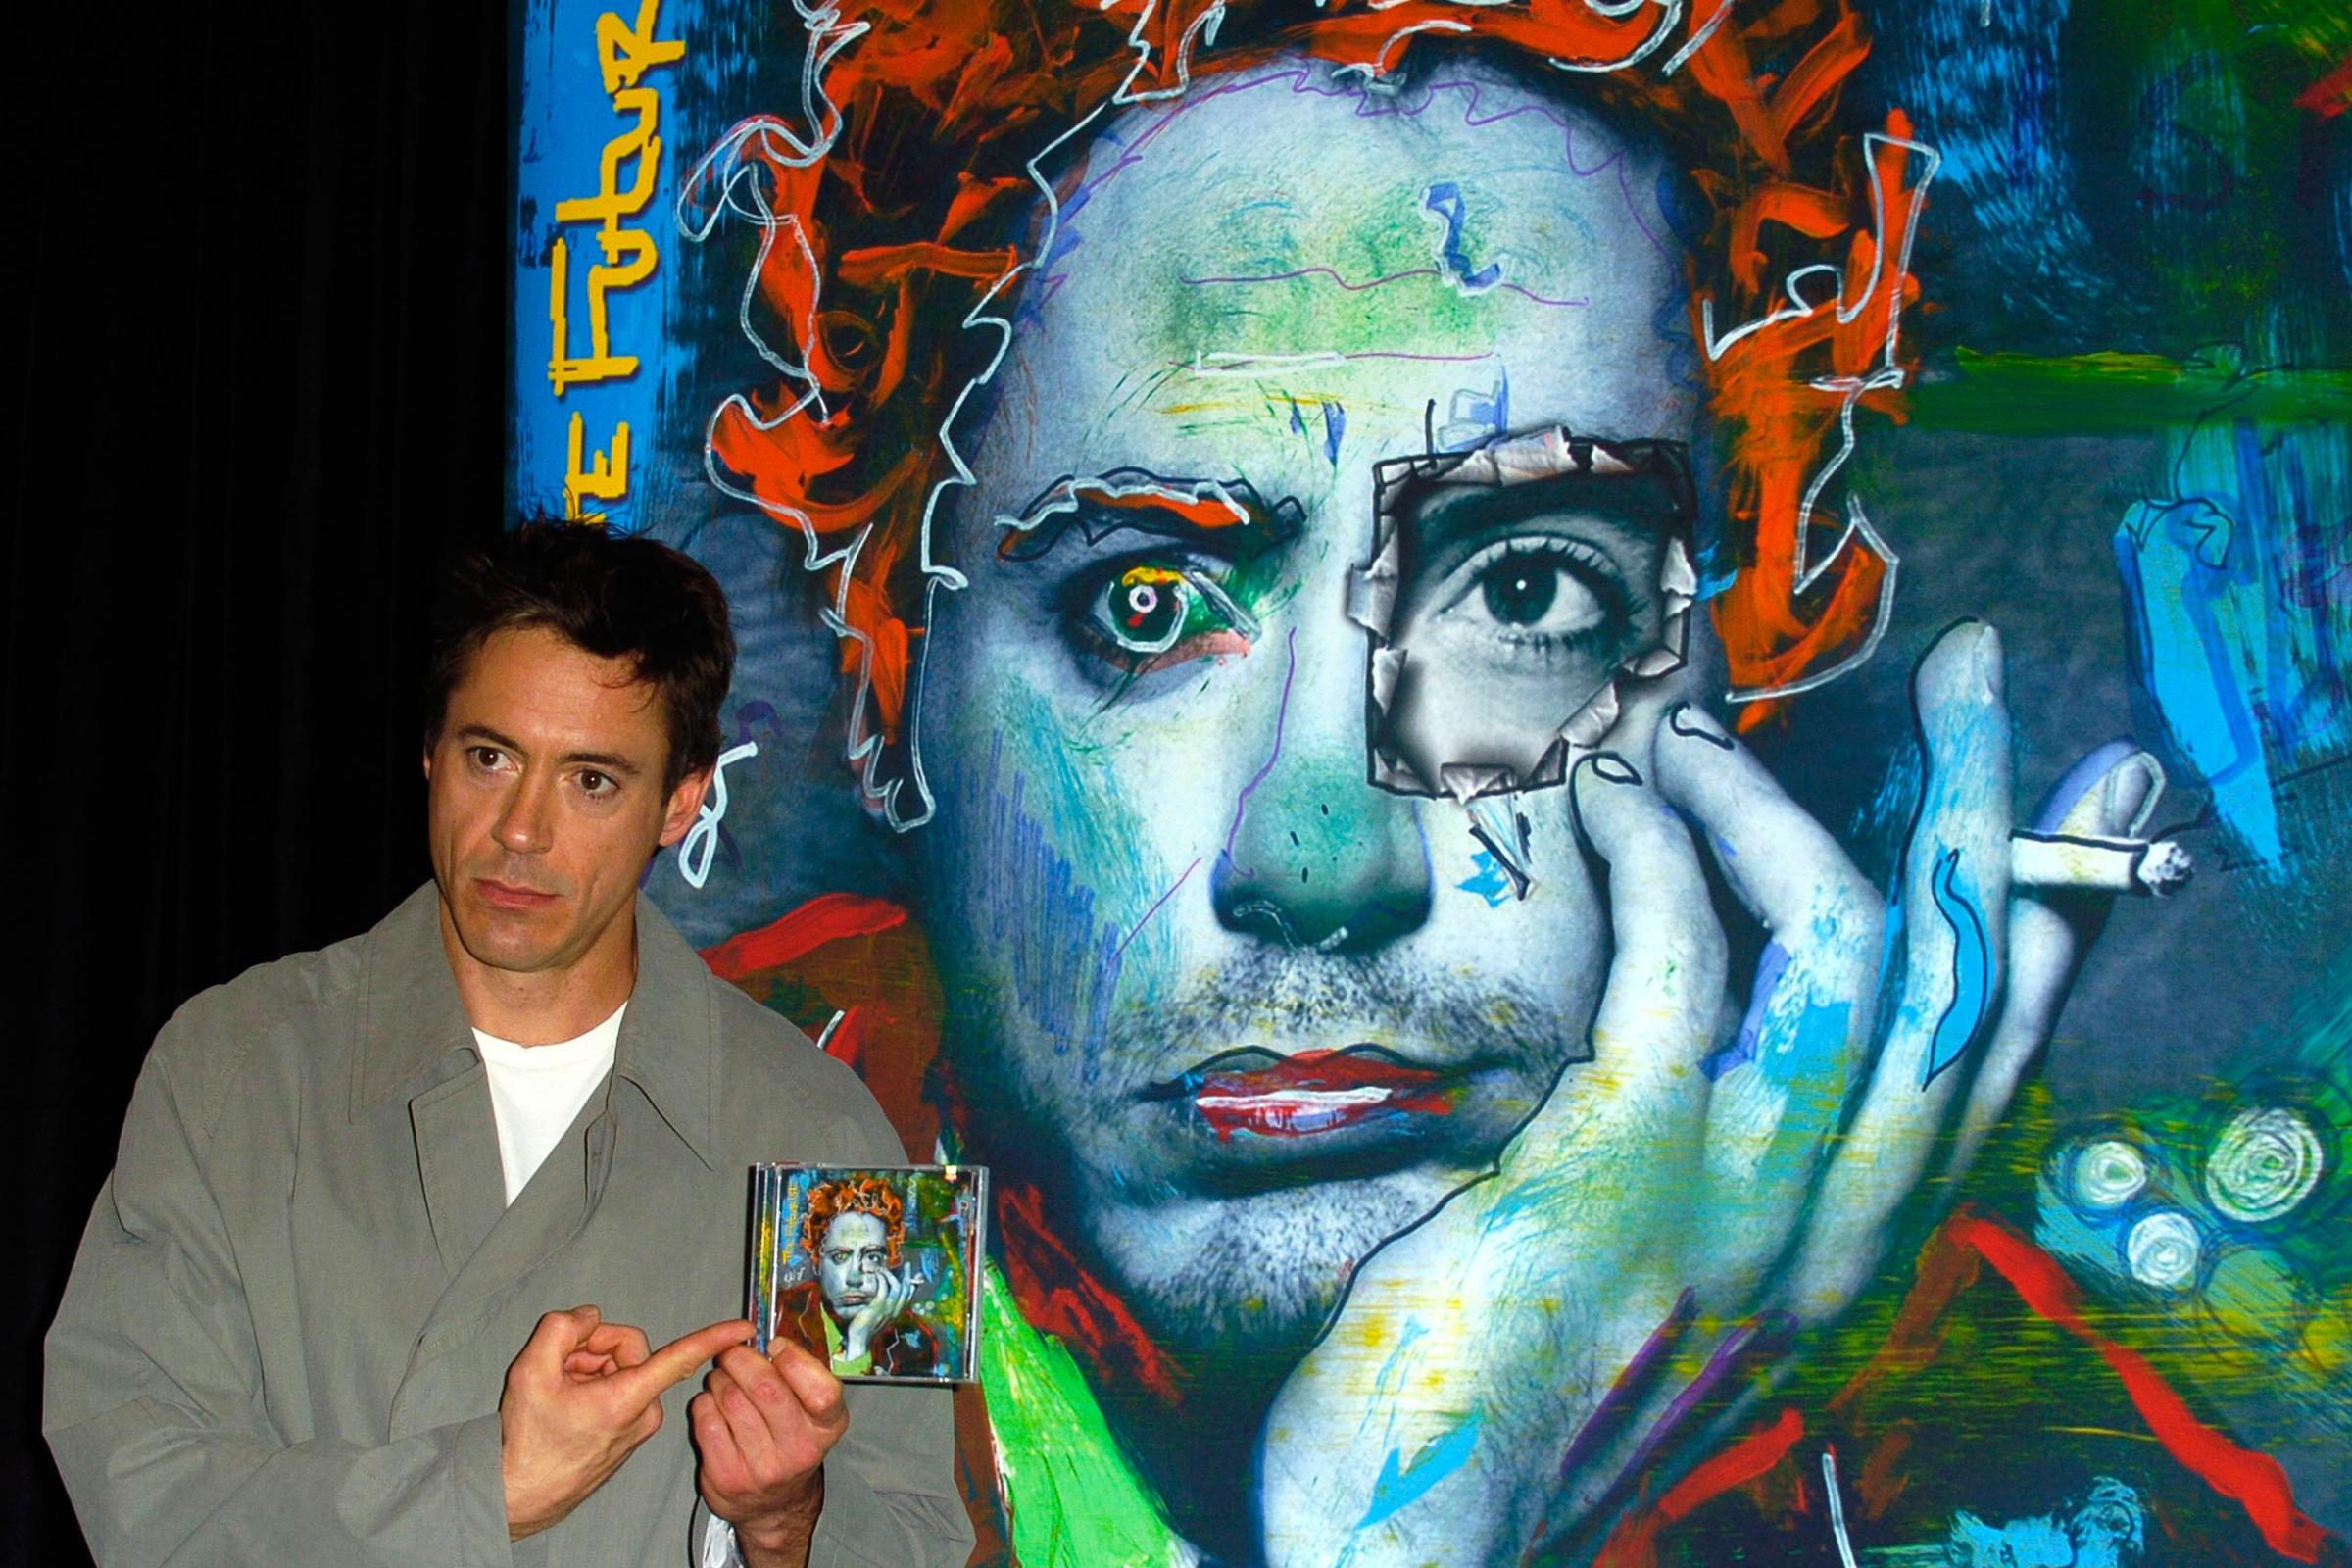 Robert Downey Jr. In-Store Signing his Debut CD "The Futurist"